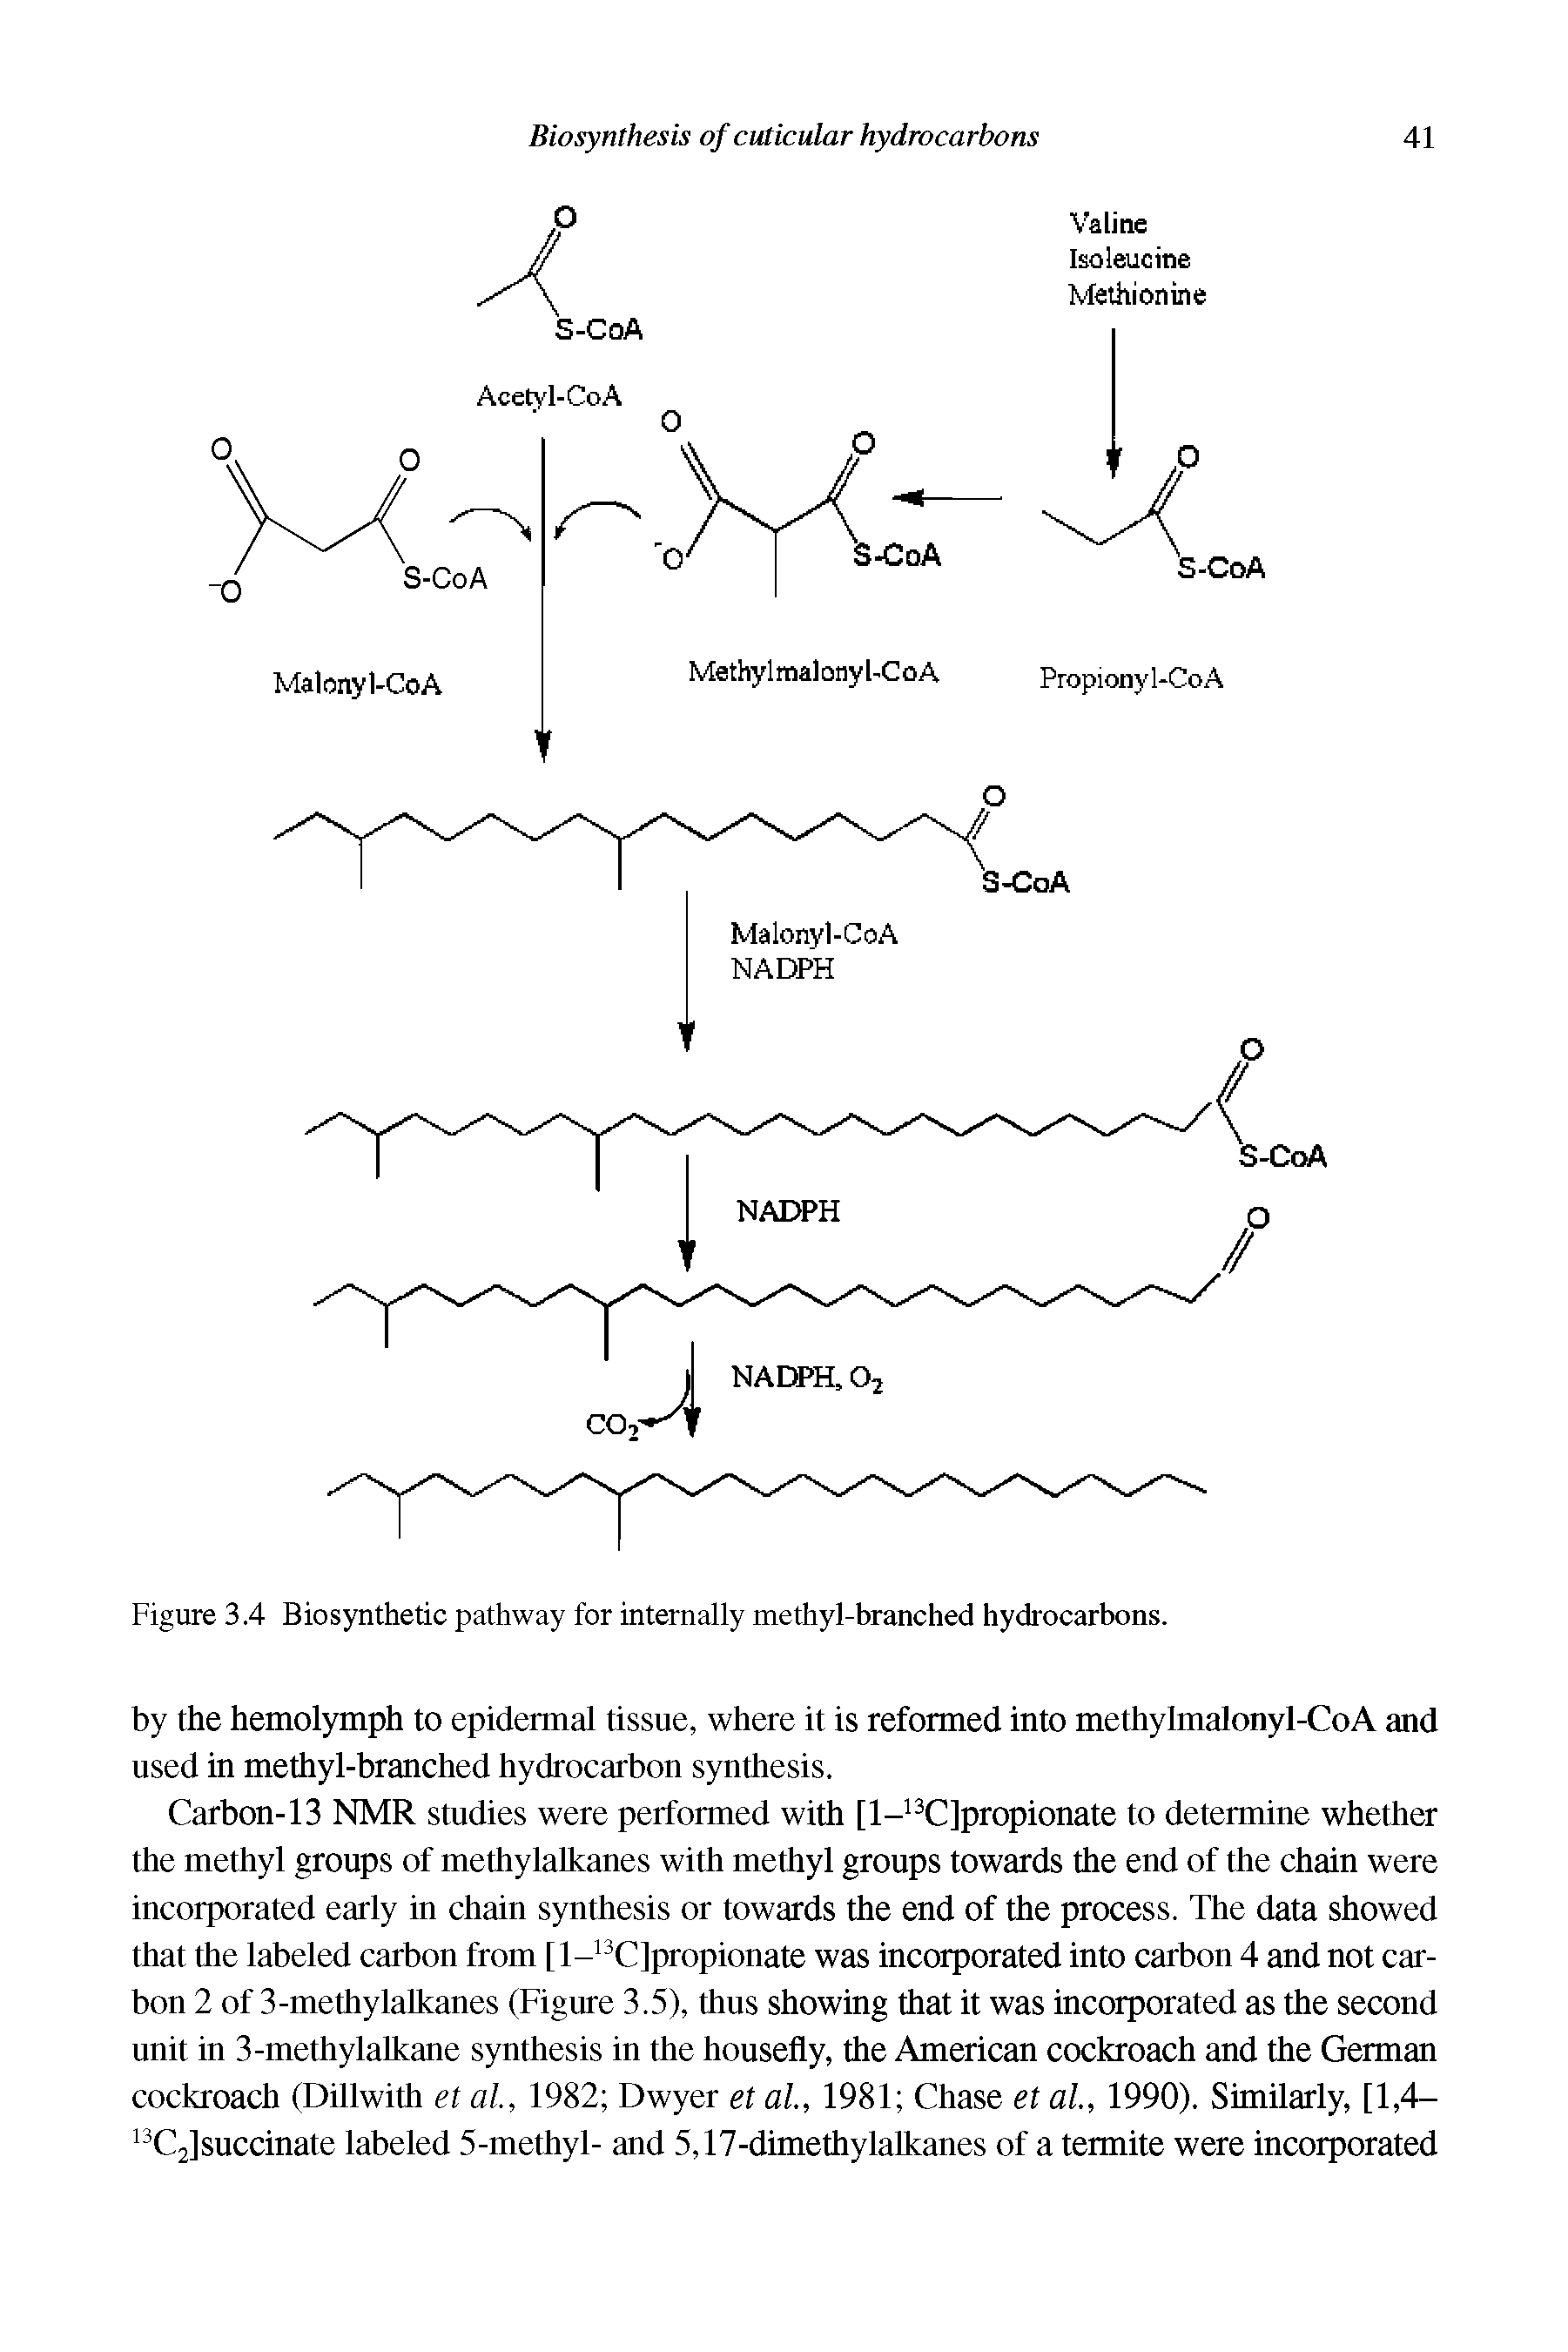 Figure 3.4 Biosynthetic pathway for internally methyl-branched hydrocarbons.